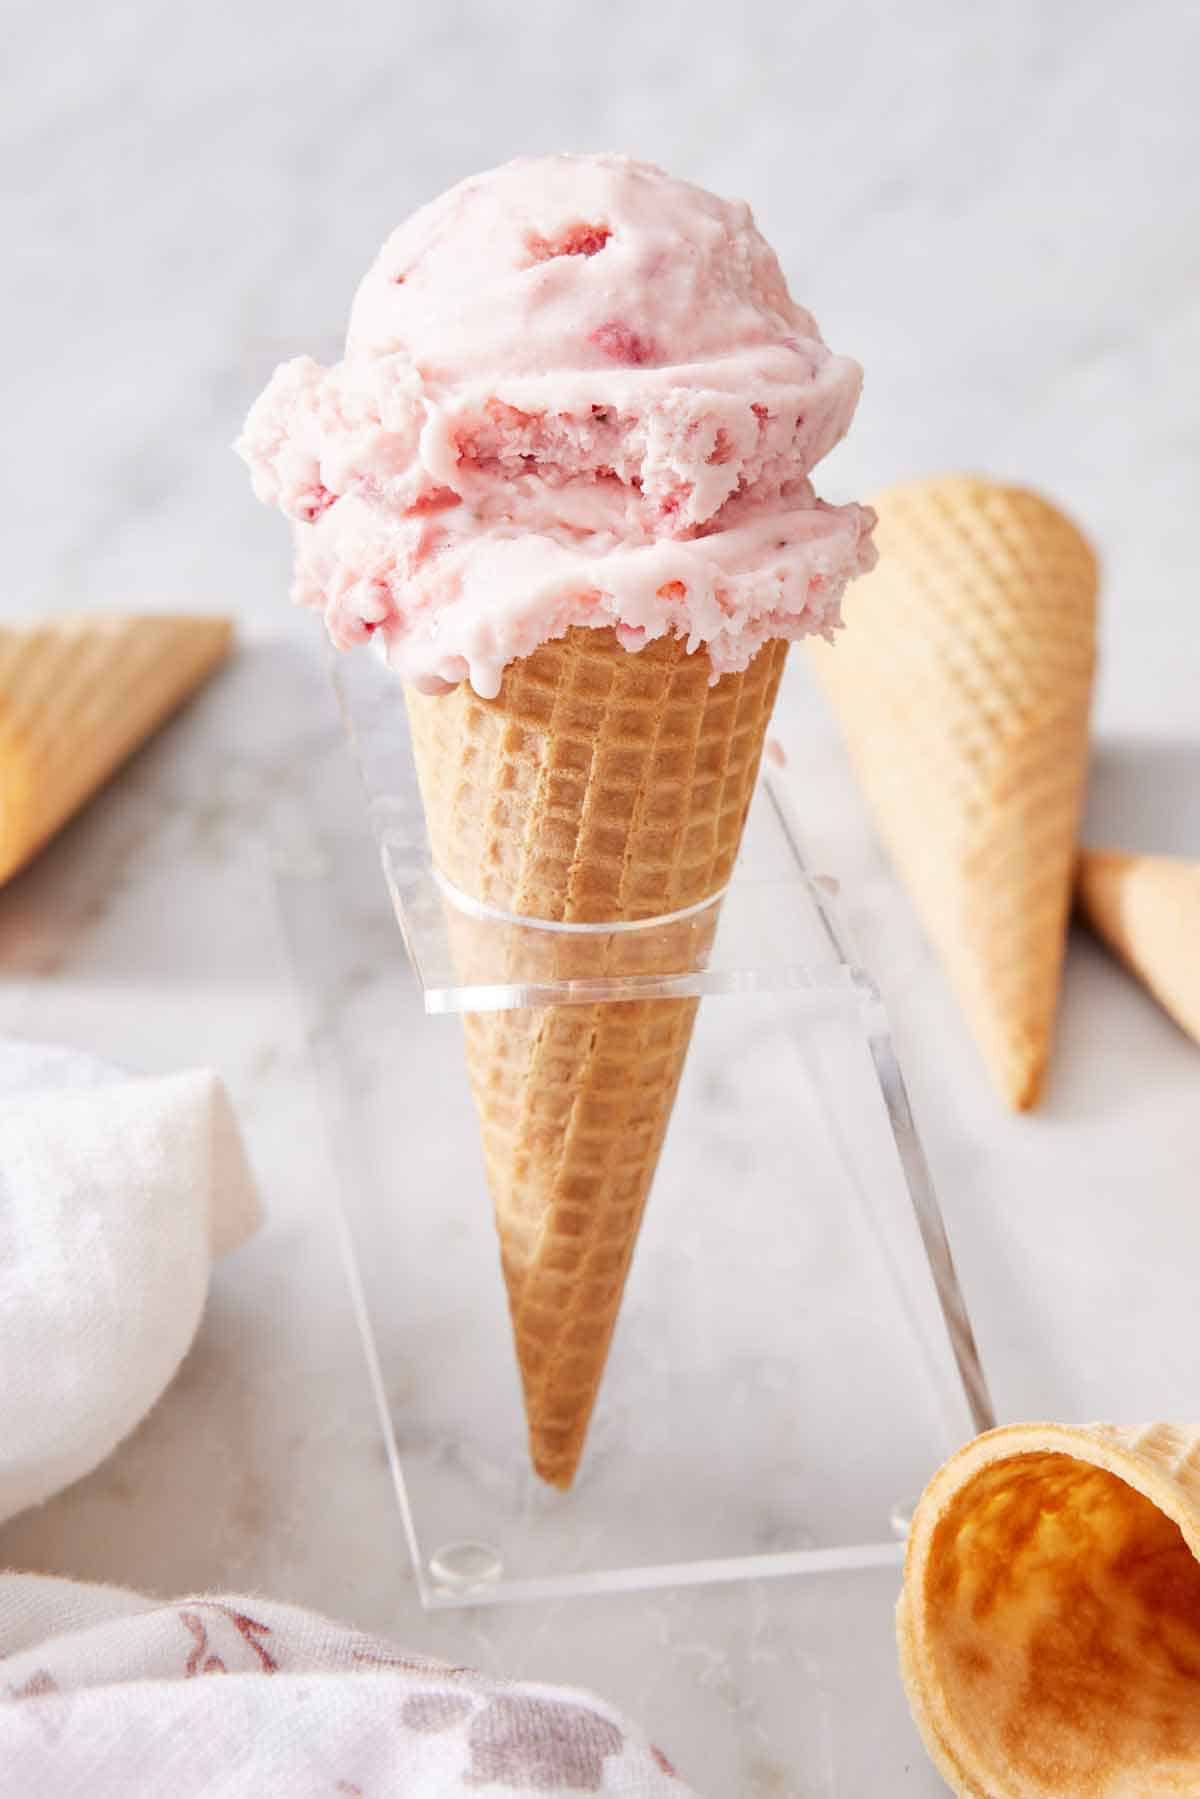 An ice cream cone with two scoops of strawberry ice cream. More cones scattered around.